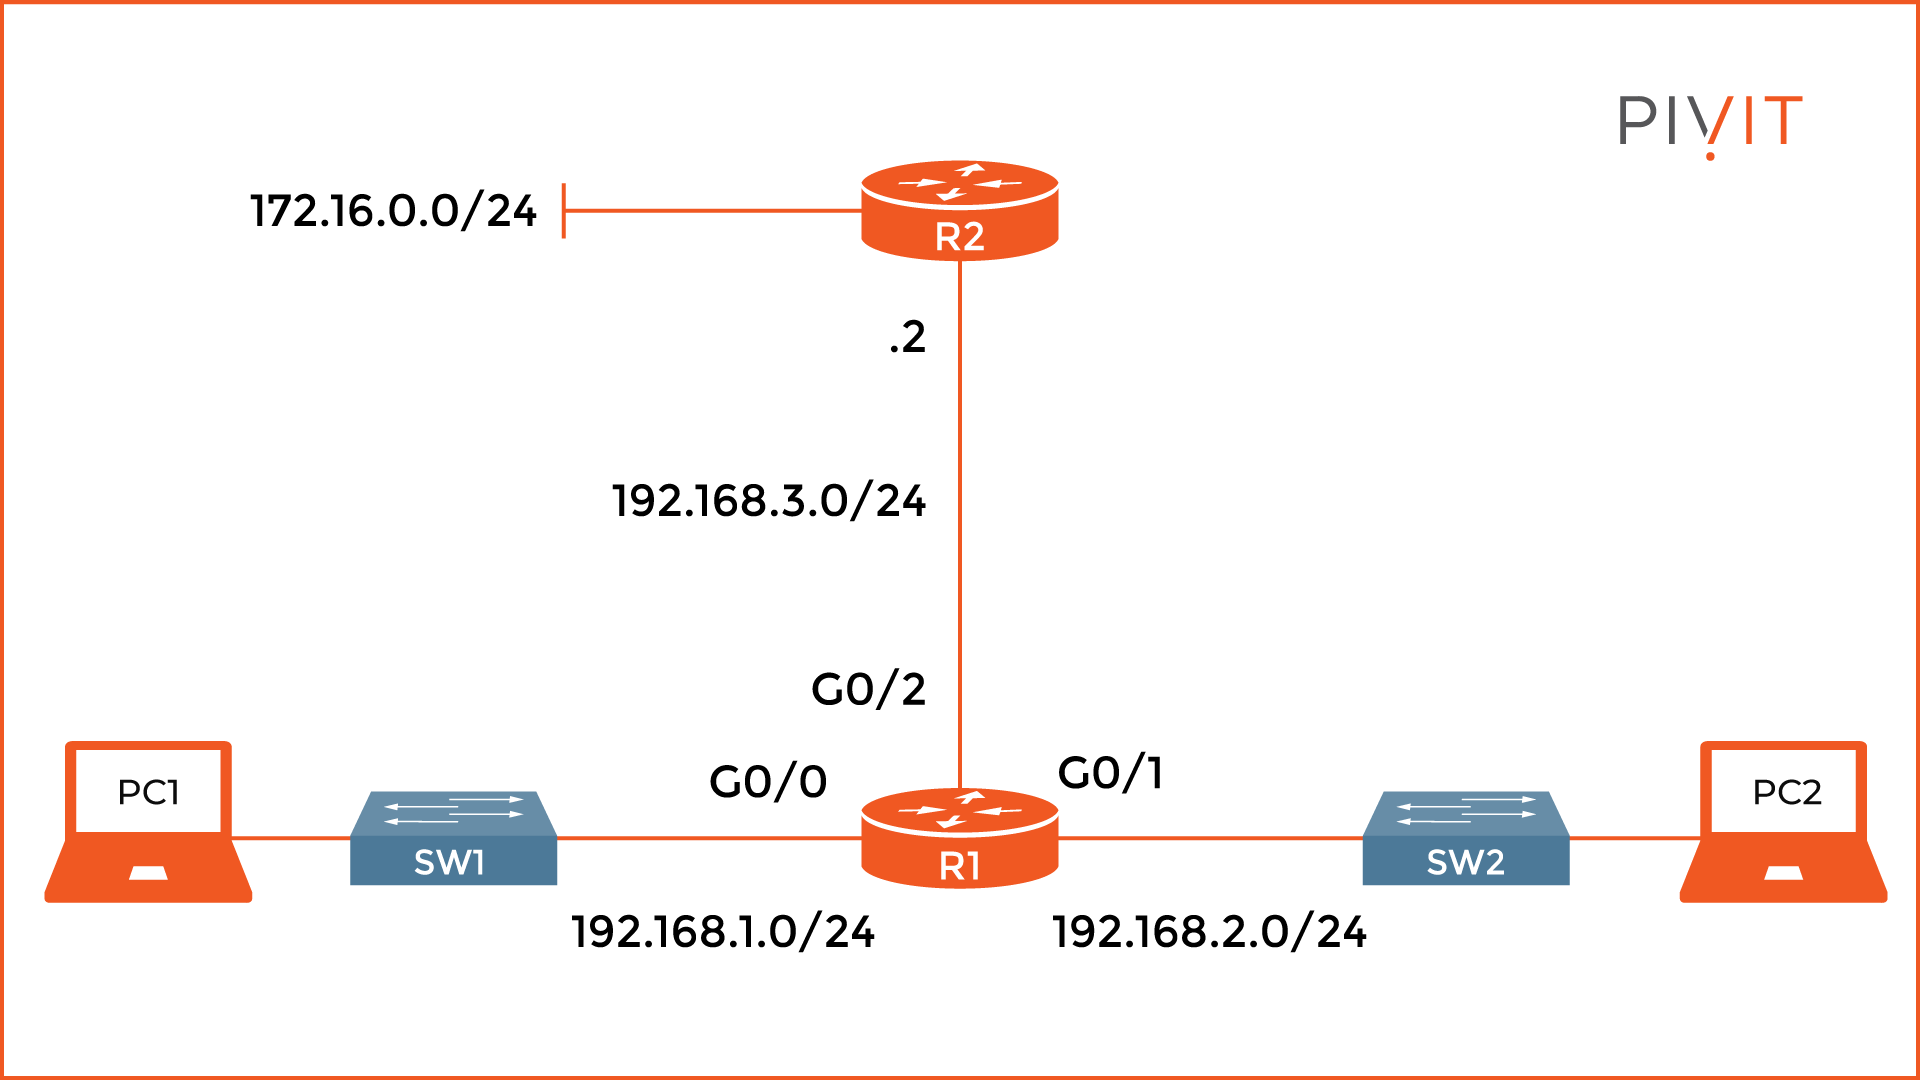 Sample static route topology with a default gateway